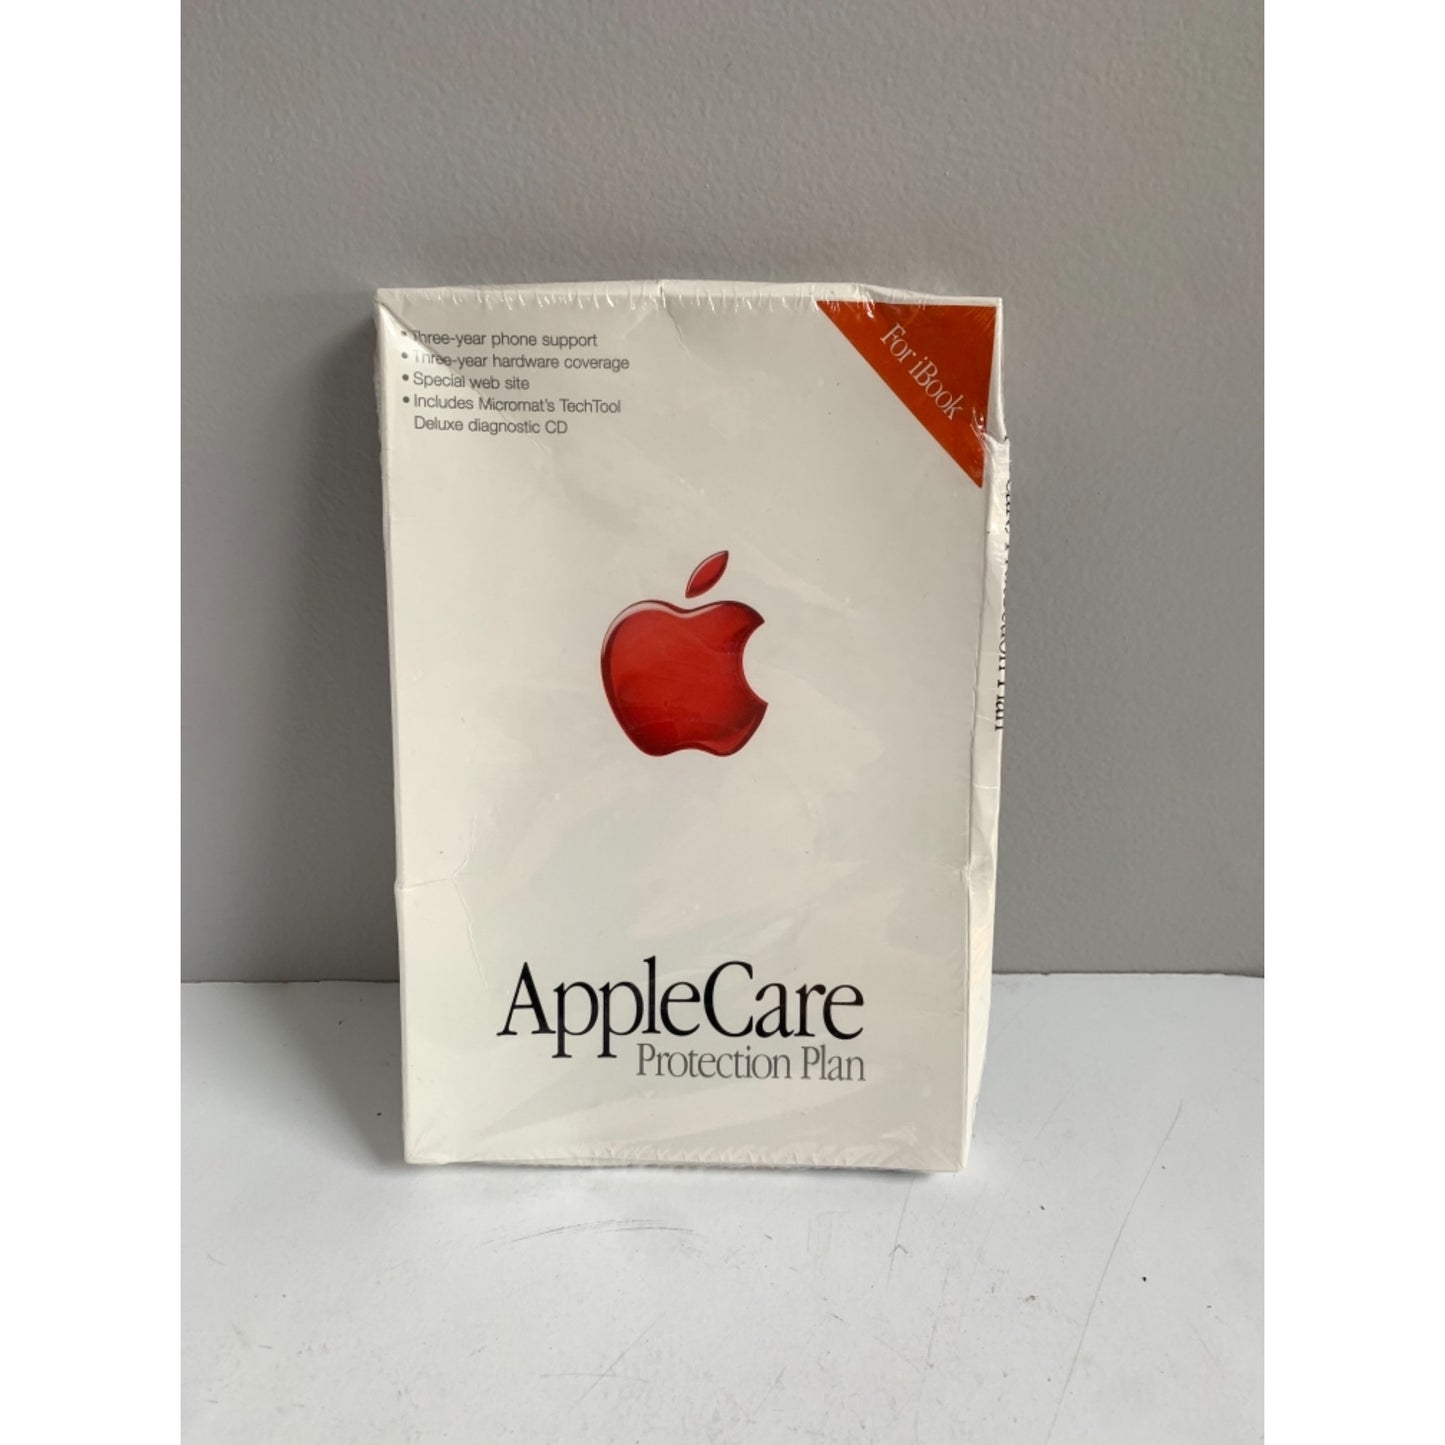 Apple AppleCare for IBook M7813LL/A New & Sealed